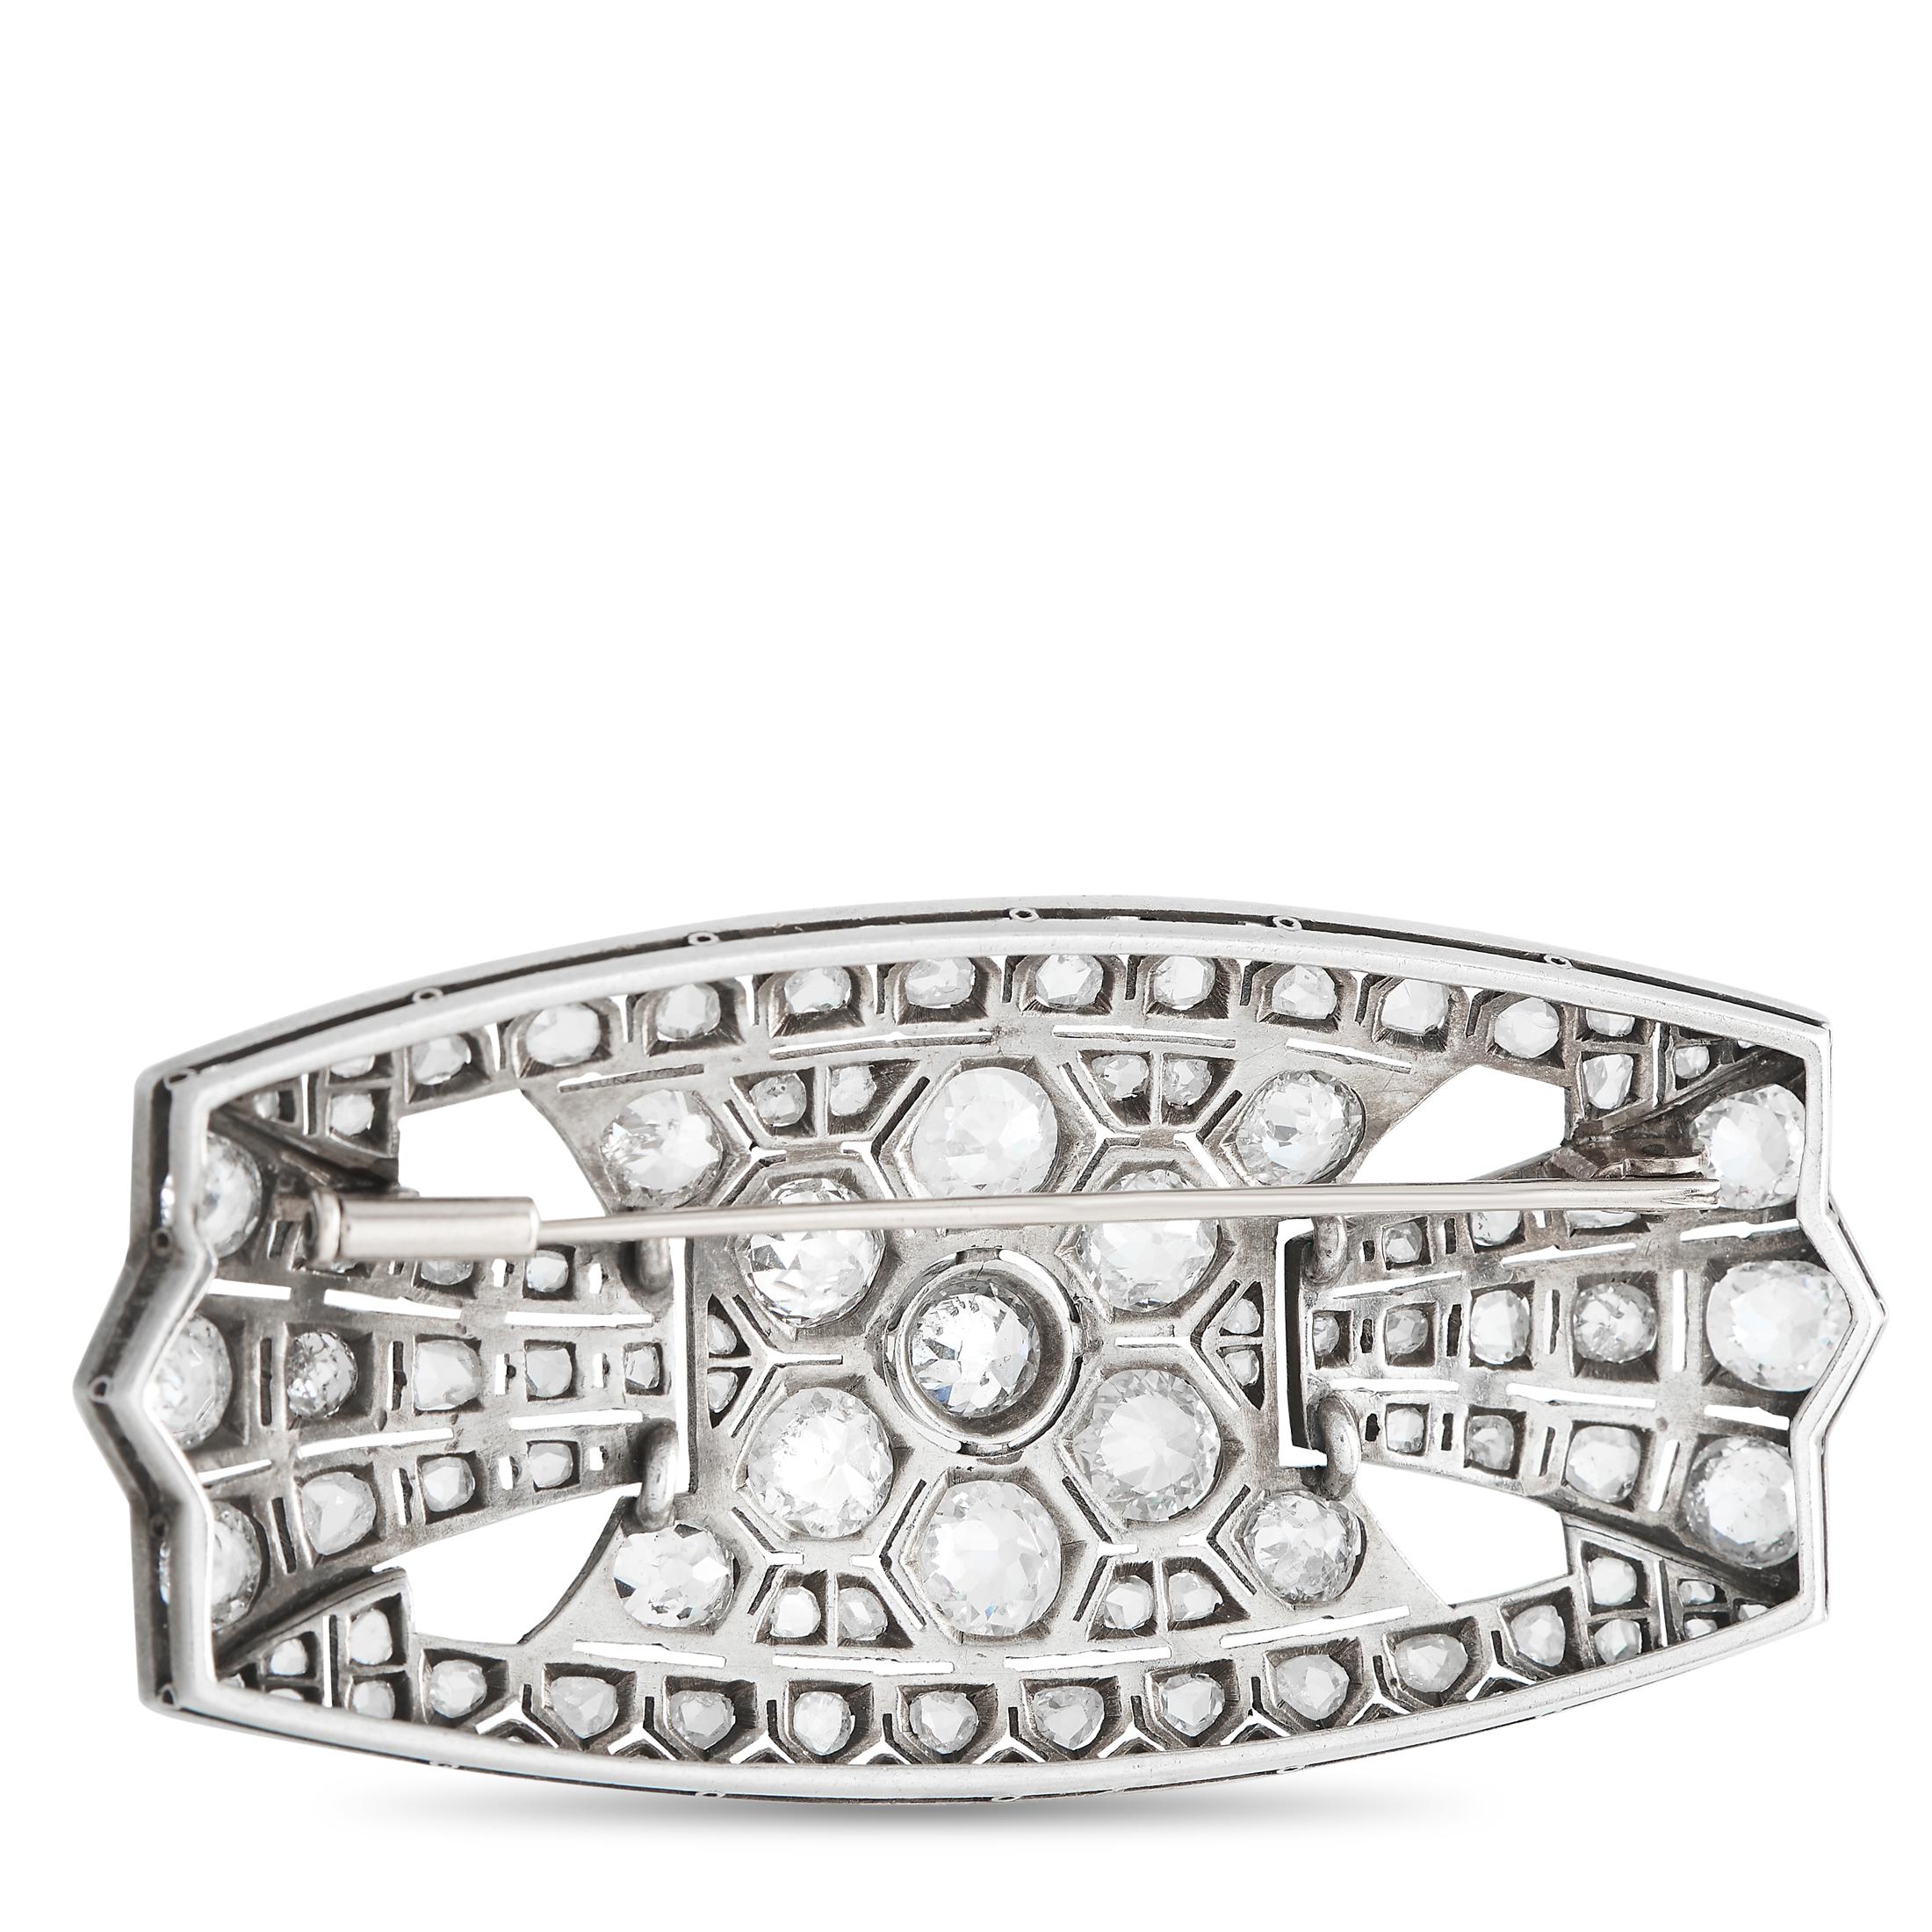 A stunning jewel you'll treasure forever. This brooch is expertly crafted in platinum and features an Art Deco style with 10 carats of diamonds set in a geometric, symmetrical, and streamlined pattern. The brooch boasts a dazzling combination of Old